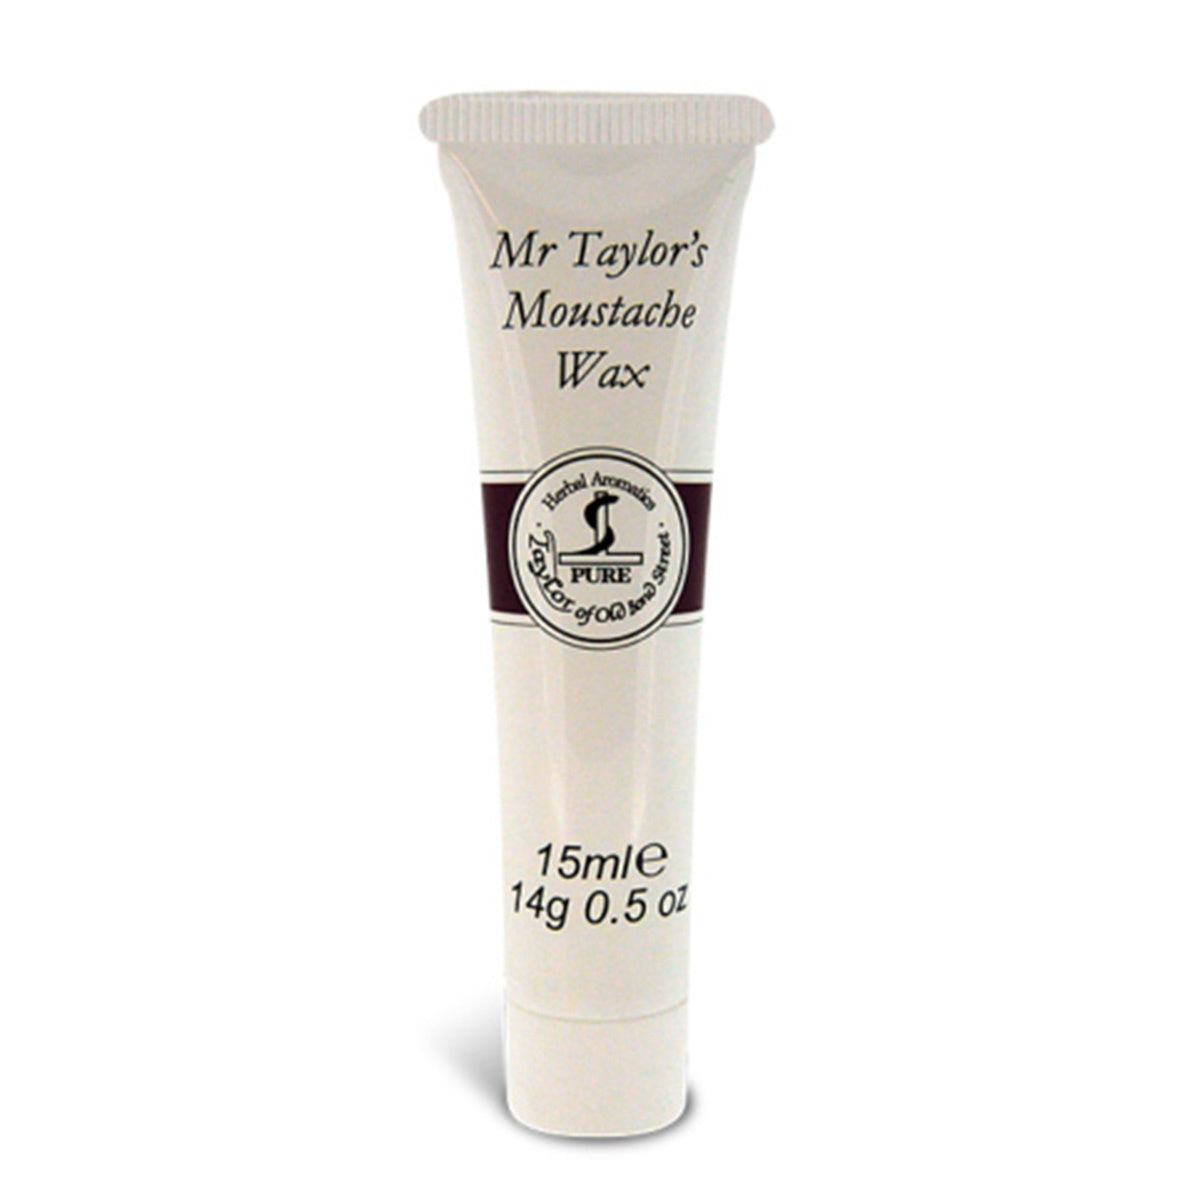 Primary image of Mr. Taylor's Moustache Wax